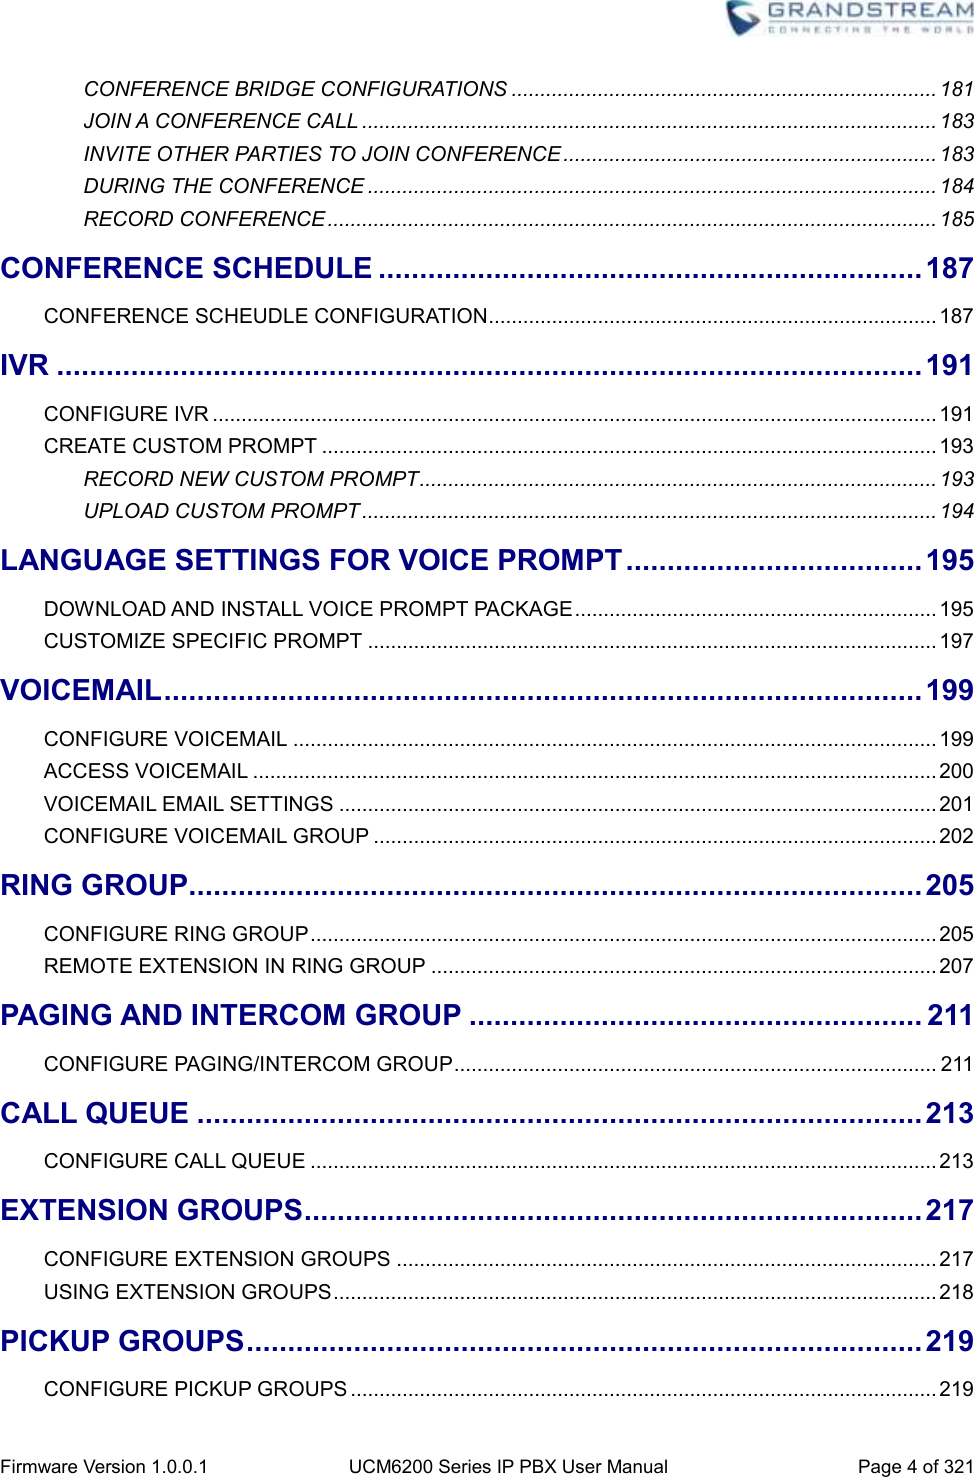  Firmware Version 1.0.0.1 UCM6200 Series IP PBX User Manual Page 4 of 321    CONFERENCE BRIDGE CONFIGURATIONS .......................................................................... 181 JOIN A CONFERENCE CALL .................................................................................................... 183 INVITE OTHER PARTIES TO JOIN CONFERENCE ................................................................. 183 DURING THE CONFERENCE ................................................................................................... 184 RECORD CONFERENCE .......................................................................................................... 185 CONFERENCE SCHEDULE .................................................................. 187 CONFERENCE SCHEUDLE CONFIGURATION .............................................................................. 187 IVR ......................................................................................................... 191 CONFIGURE IVR .............................................................................................................................. 191 CREATE CUSTOM PROMPT ........................................................................................................... 193 RECORD NEW CUSTOM PROMPT .......................................................................................... 193 UPLOAD CUSTOM PROMPT .................................................................................................... 194 LANGUAGE SETTINGS FOR VOICE PROMPT .................................... 195 DOWNLOAD AND INSTALL VOICE PROMPT PACKAGE ............................................................... 195 CUSTOMIZE SPECIFIC PROMPT ................................................................................................... 197 VOICEMAIL ............................................................................................ 199 CONFIGURE VOICEMAIL ................................................................................................................ 199 ACCESS VOICEMAIL ....................................................................................................................... 200 VOICEMAIL EMAIL SETTINGS ........................................................................................................ 201 CONFIGURE VOICEMAIL GROUP .................................................................................................. 202 RING GROUP ......................................................................................... 205 CONFIGURE RING GROUP ............................................................................................................. 205 REMOTE EXTENSION IN RING GROUP ........................................................................................ 207 PAGING AND INTERCOM GROUP ....................................................... 211 CONFIGURE PAGING/INTERCOM GROUP .................................................................................... 211 CALL QUEUE ........................................................................................ 213 CONFIGURE CALL QUEUE ............................................................................................................. 213 EXTENSION GROUPS ........................................................................... 217 CONFIGURE EXTENSION GROUPS .............................................................................................. 217 USING EXTENSION GROUPS ......................................................................................................... 218 PICKUP GROUPS .................................................................................. 219 CONFIGURE PICKUP GROUPS ...................................................................................................... 219 